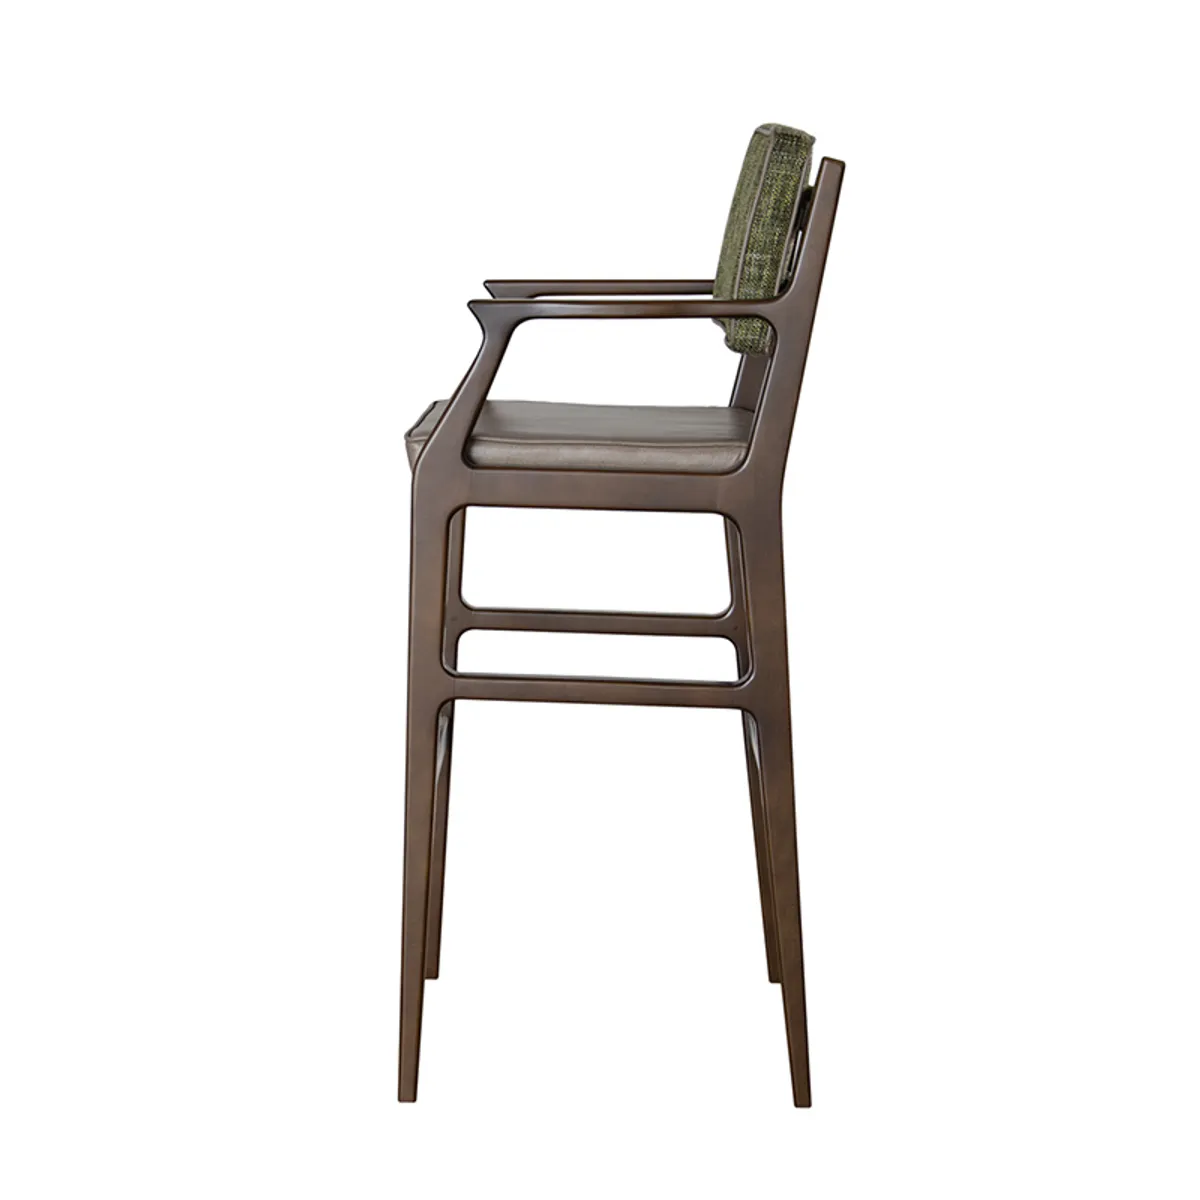 Linden Bar Stool Wooden Frame Stool For Bars And Hotels213